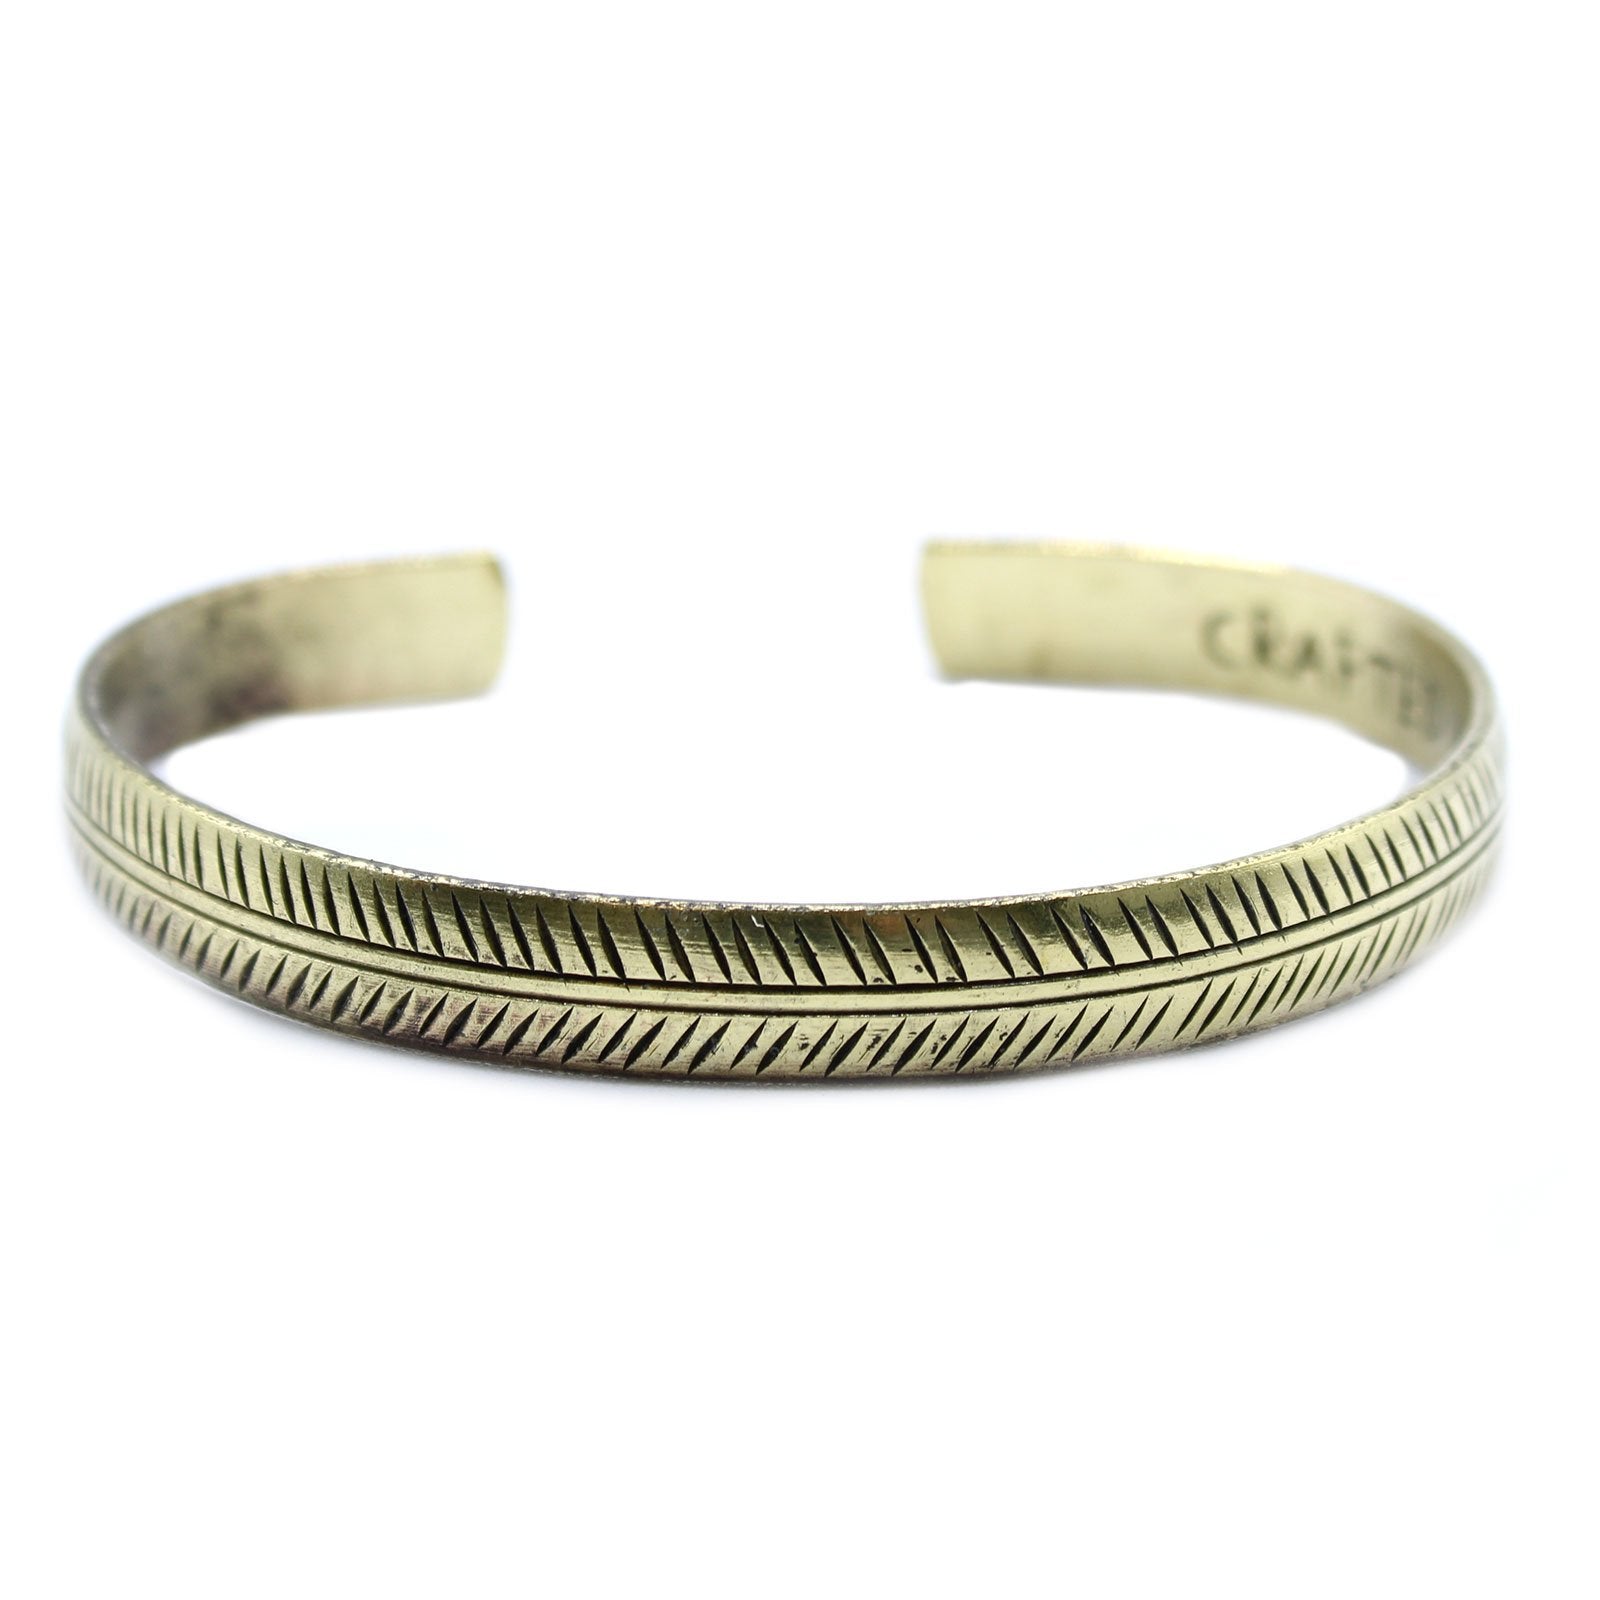 magnetic copper and brass bracelet wearing| Alibaba.com